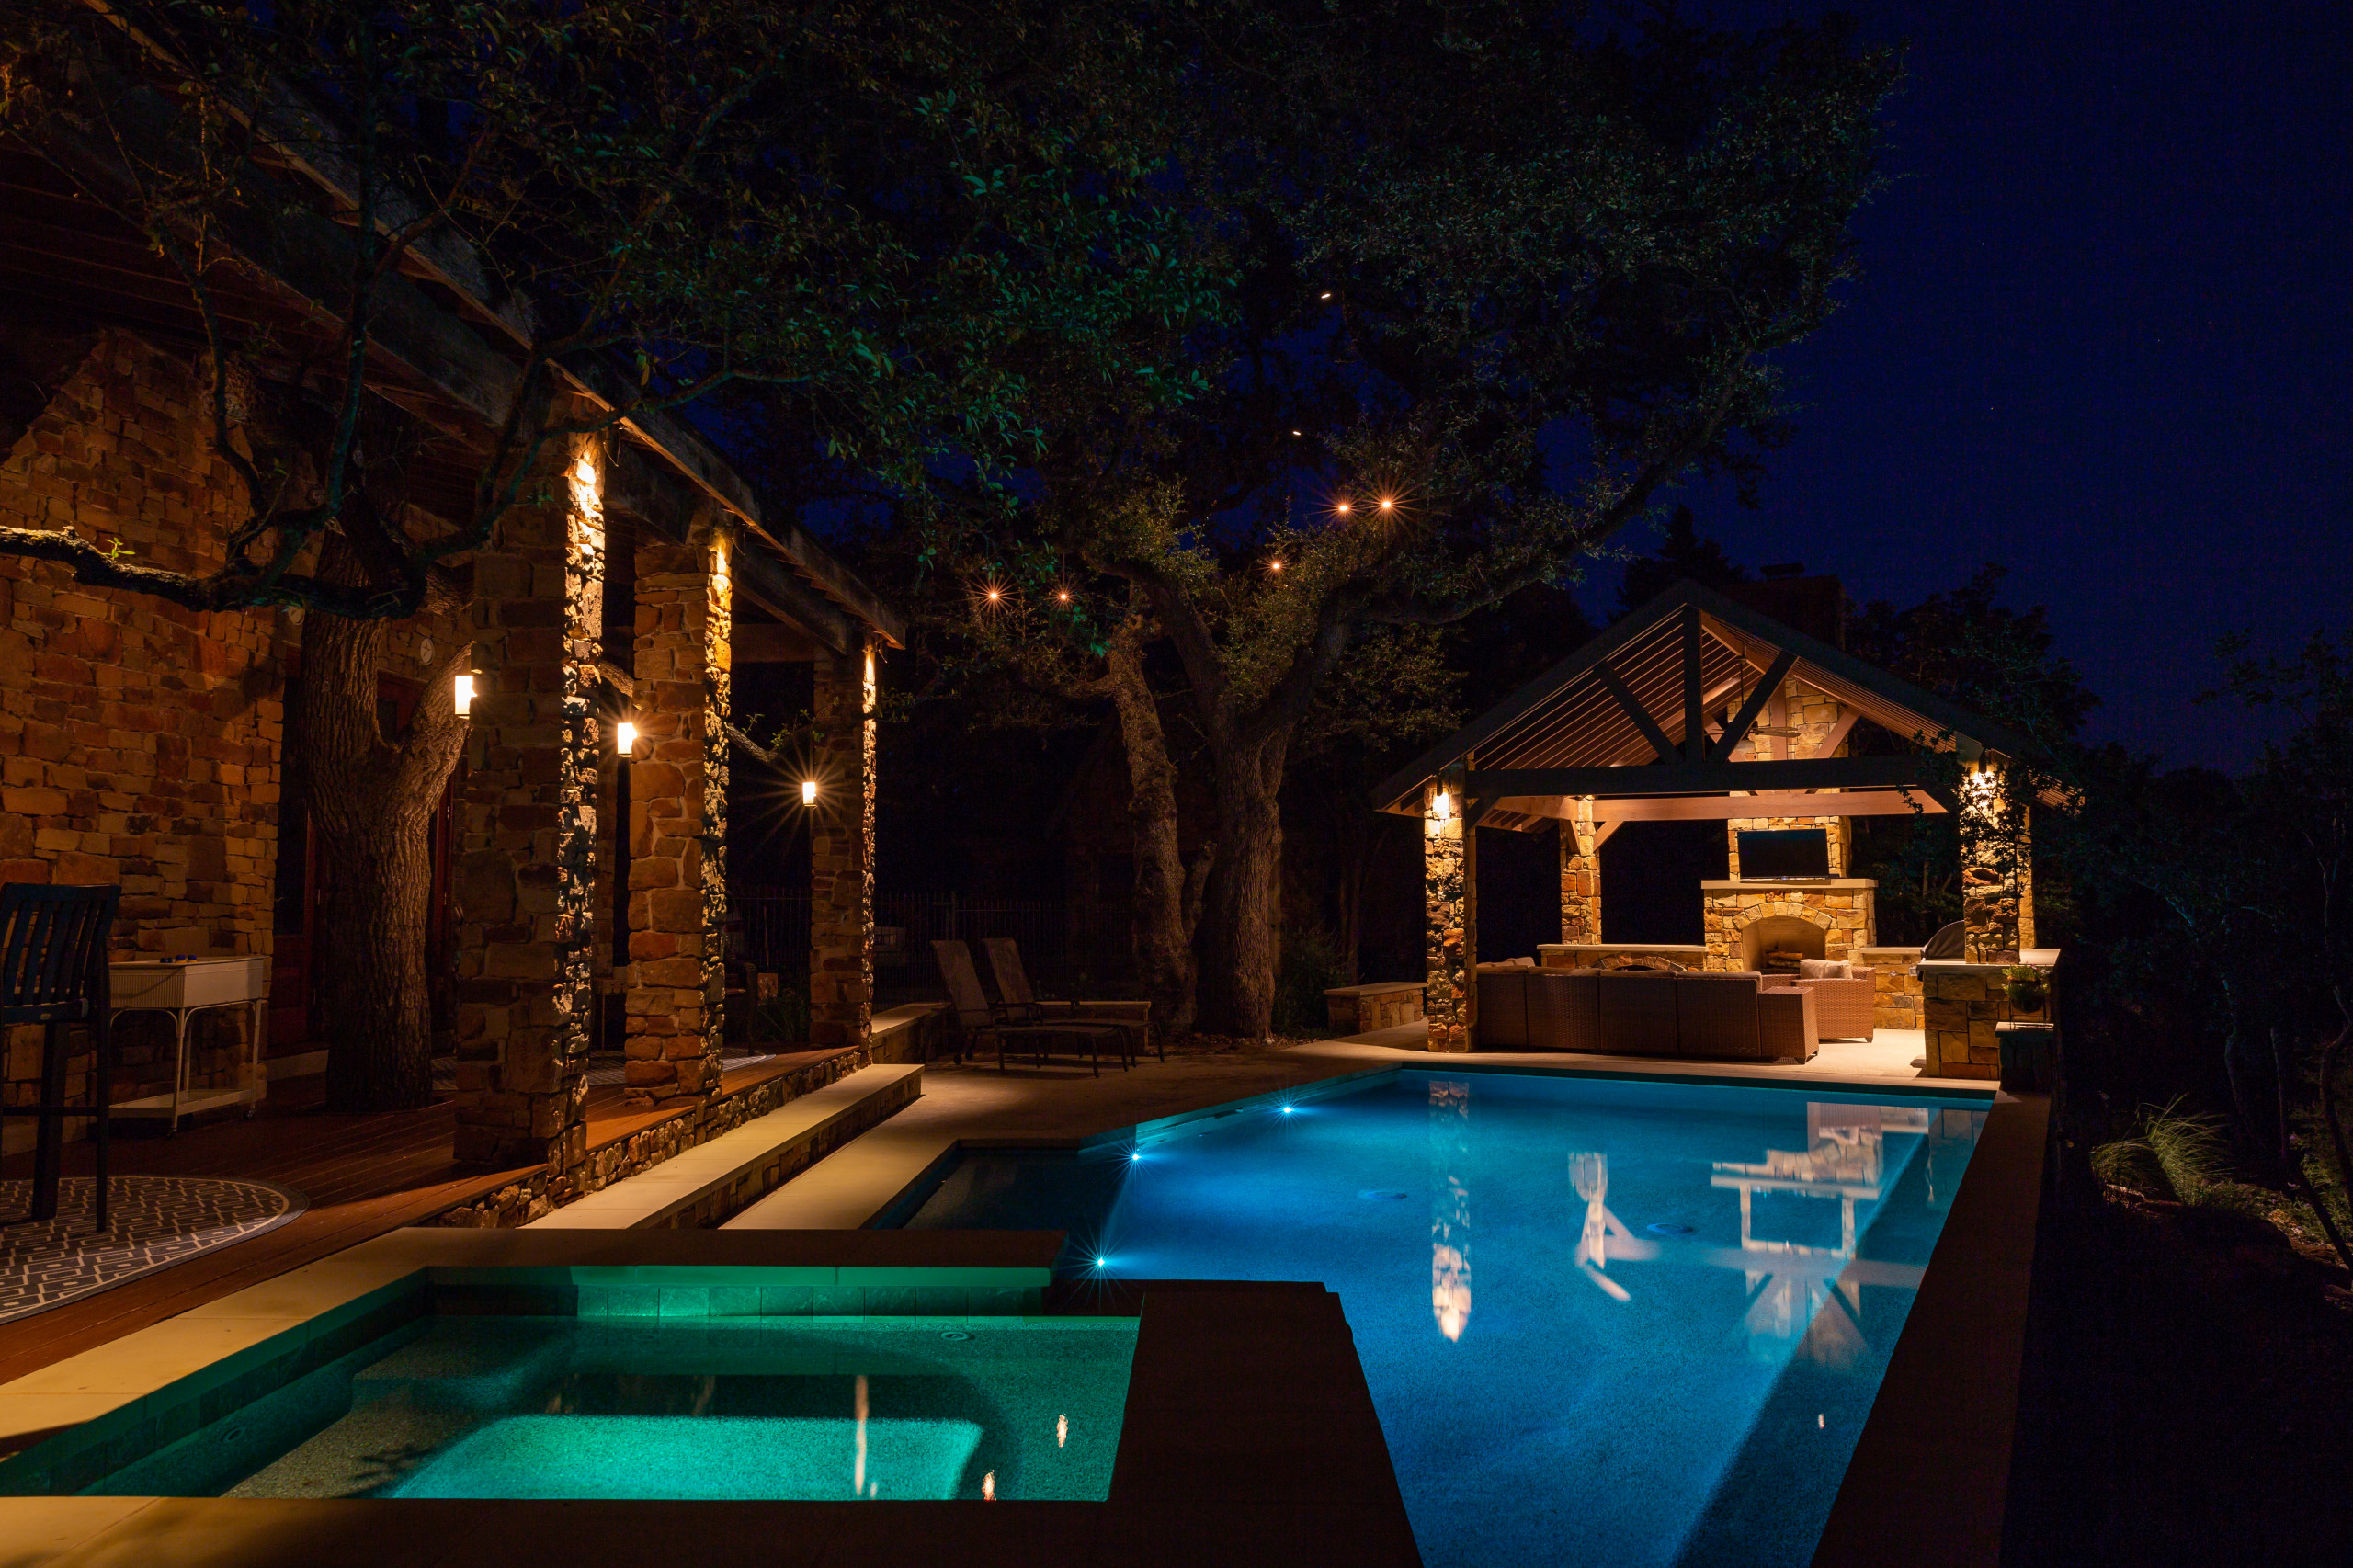 Texas Hill Country Pool at Night